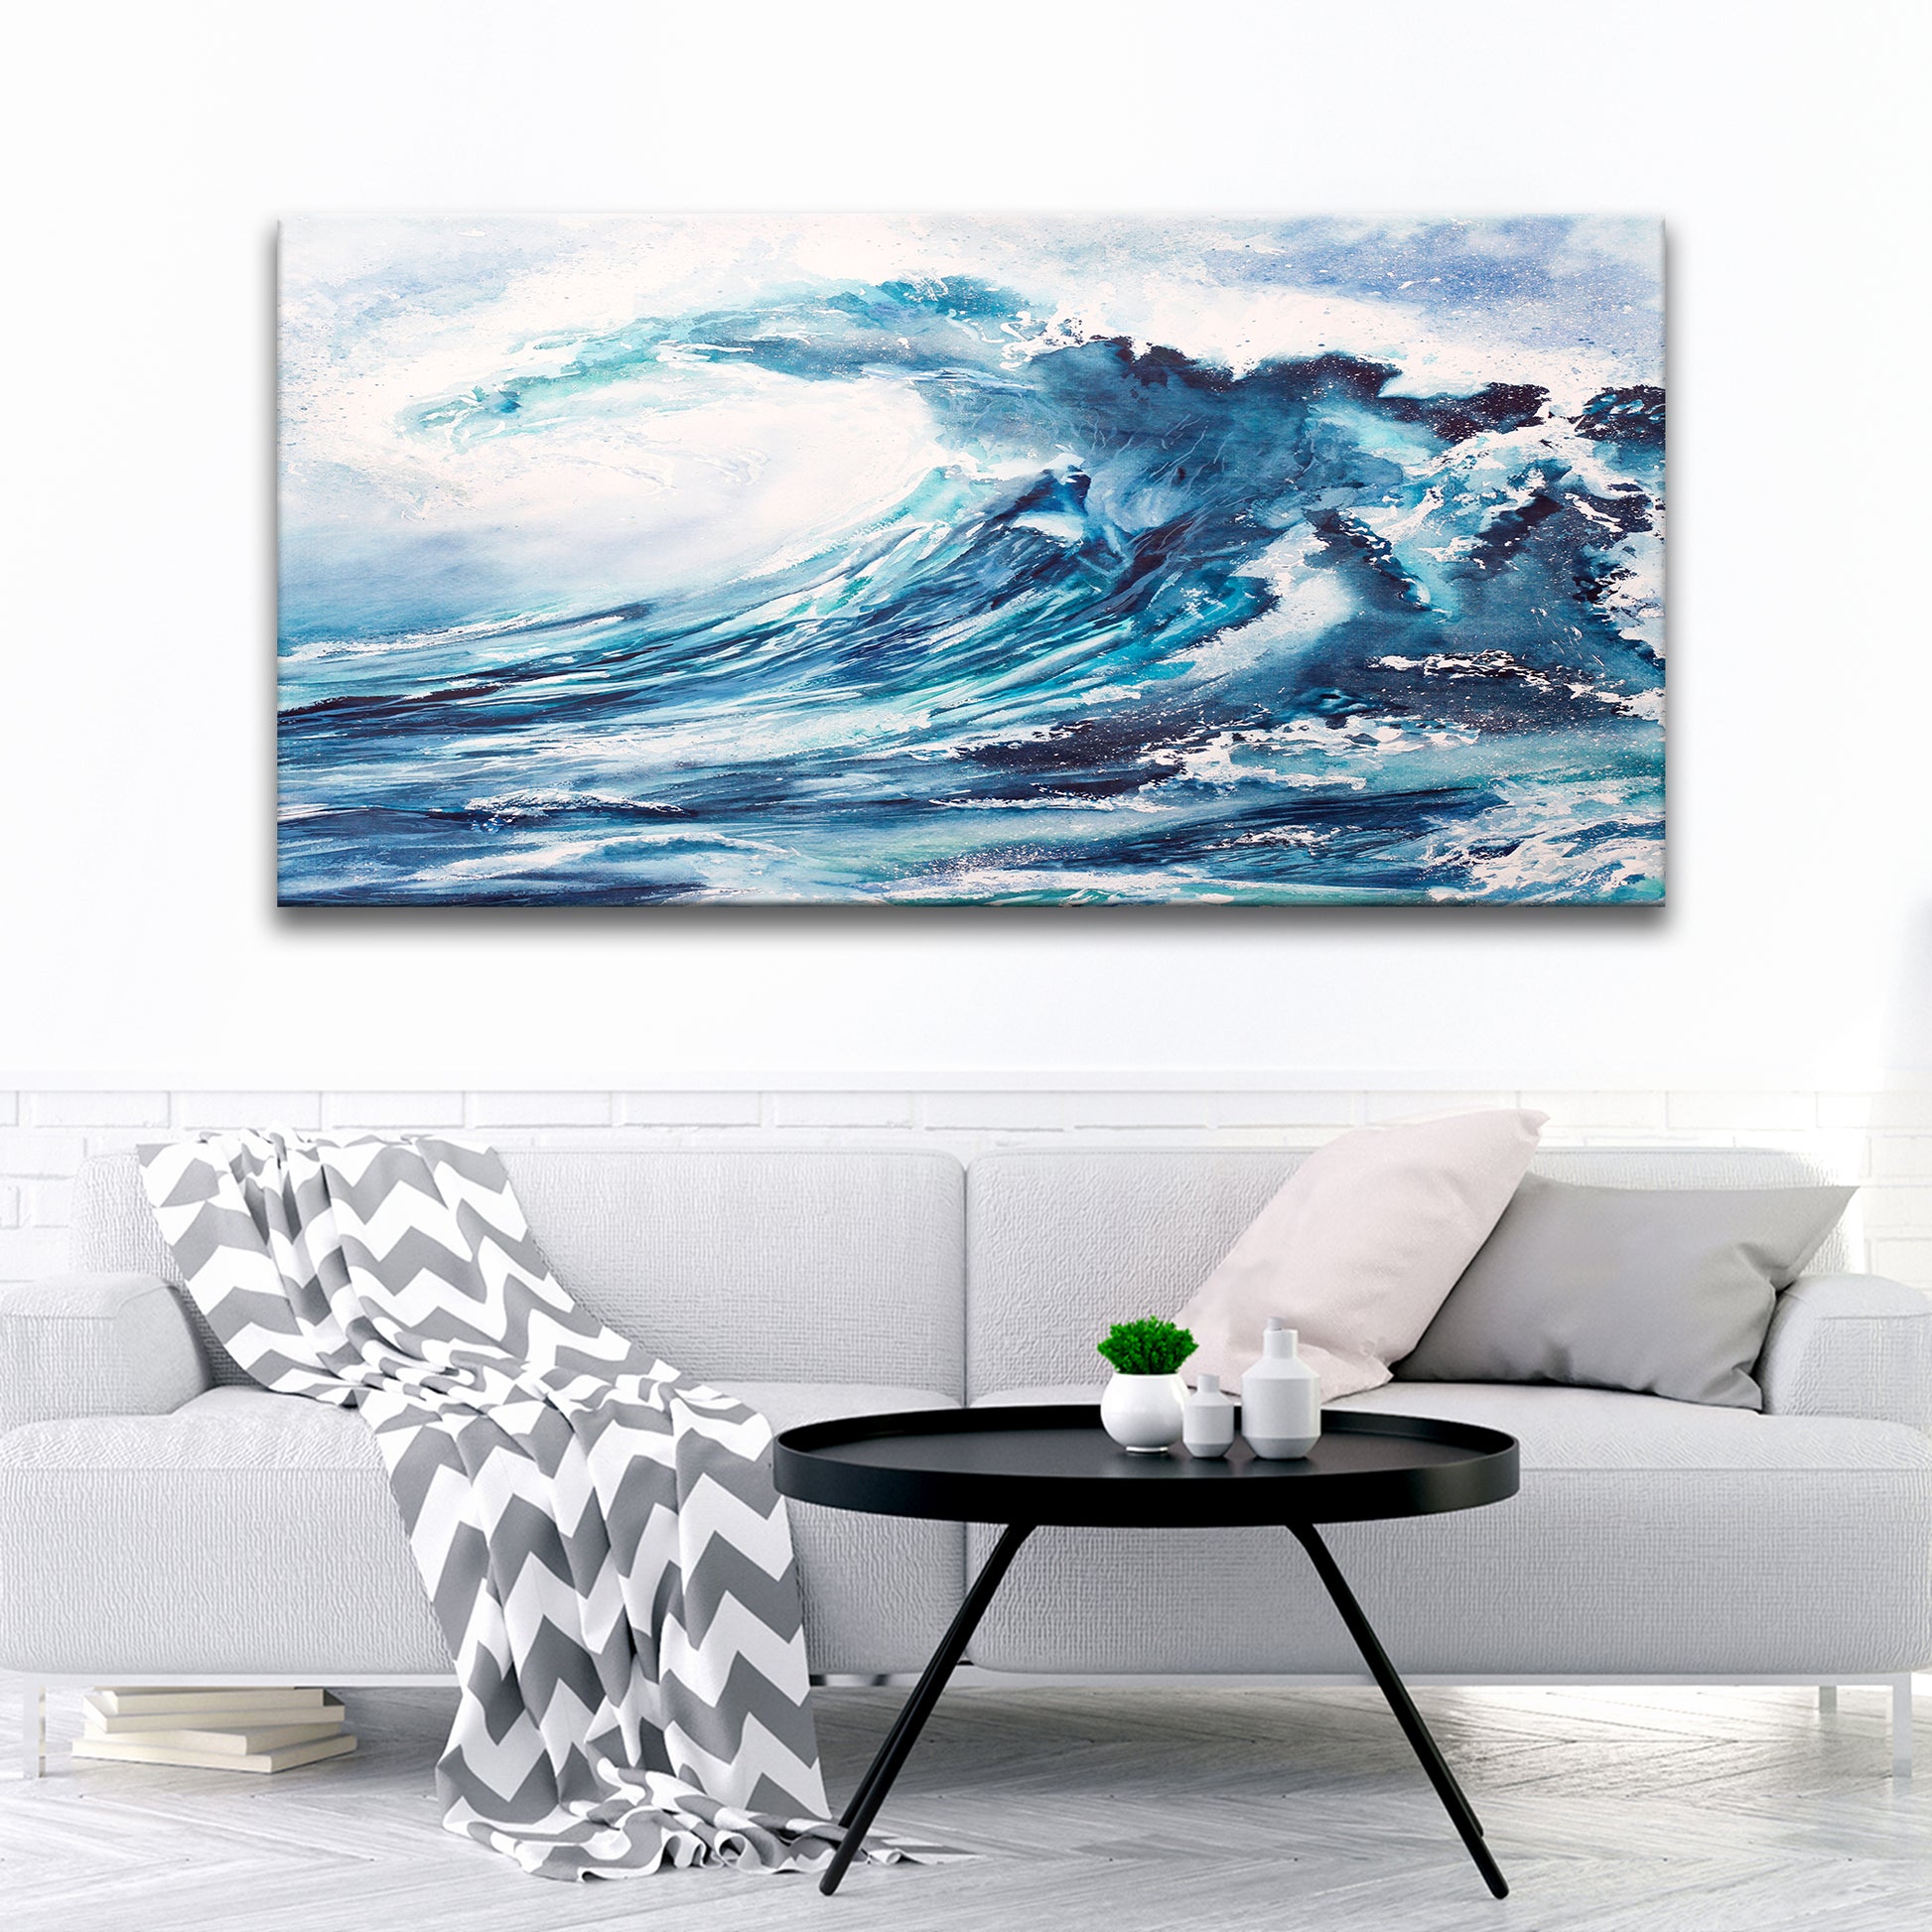 Textured Ocean Wave Painting Canvas Wall Art Style 1 - Image by Tailored Canvases